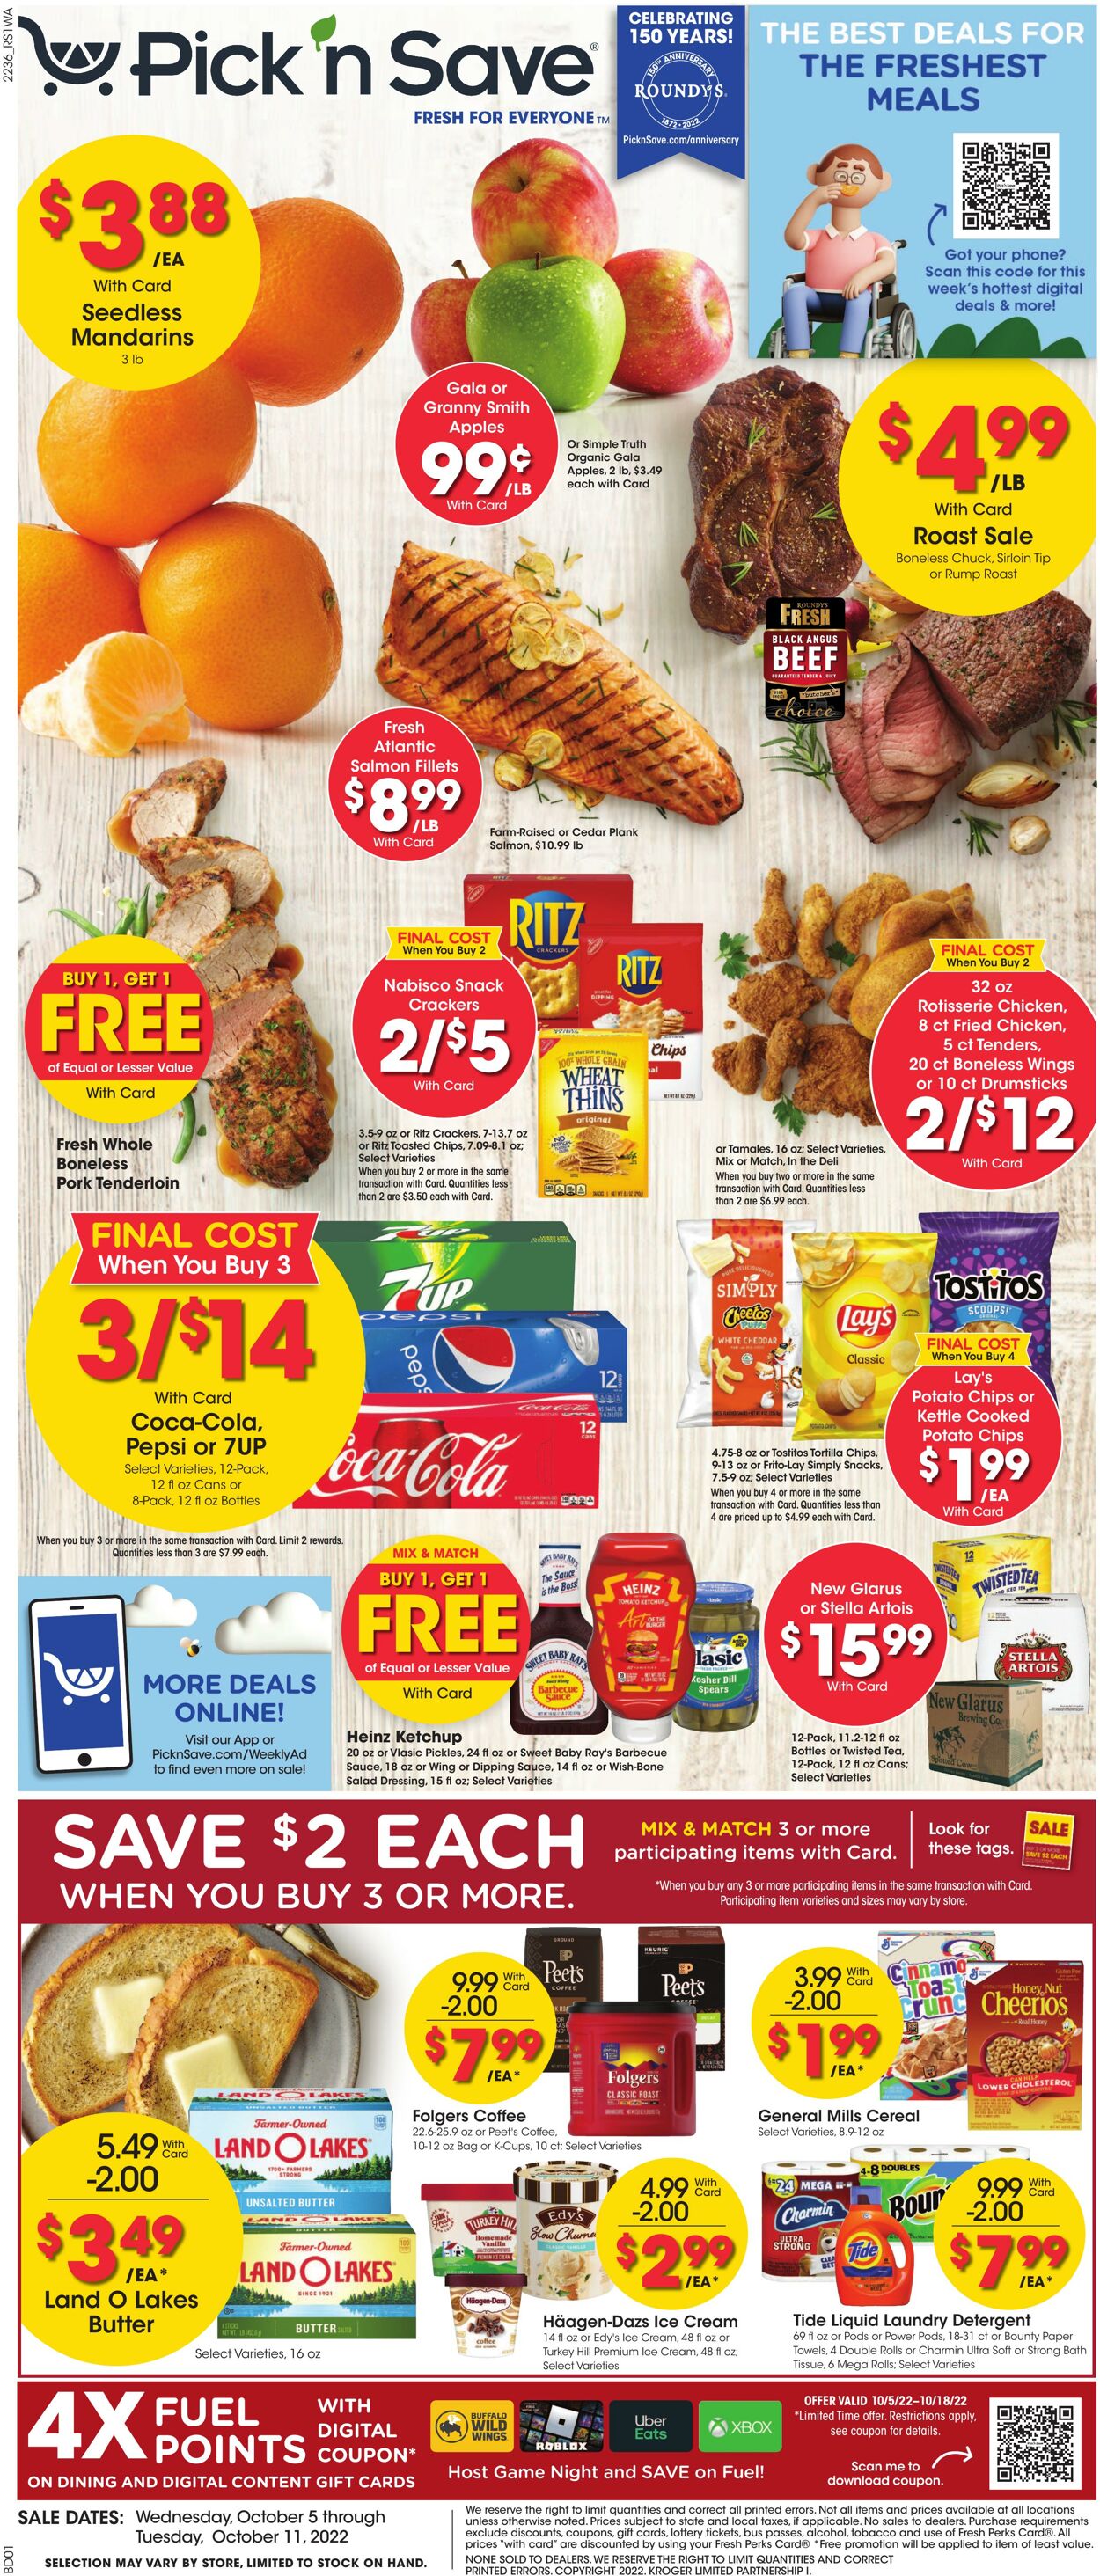 Pick'n'Save Promotional weekly ads